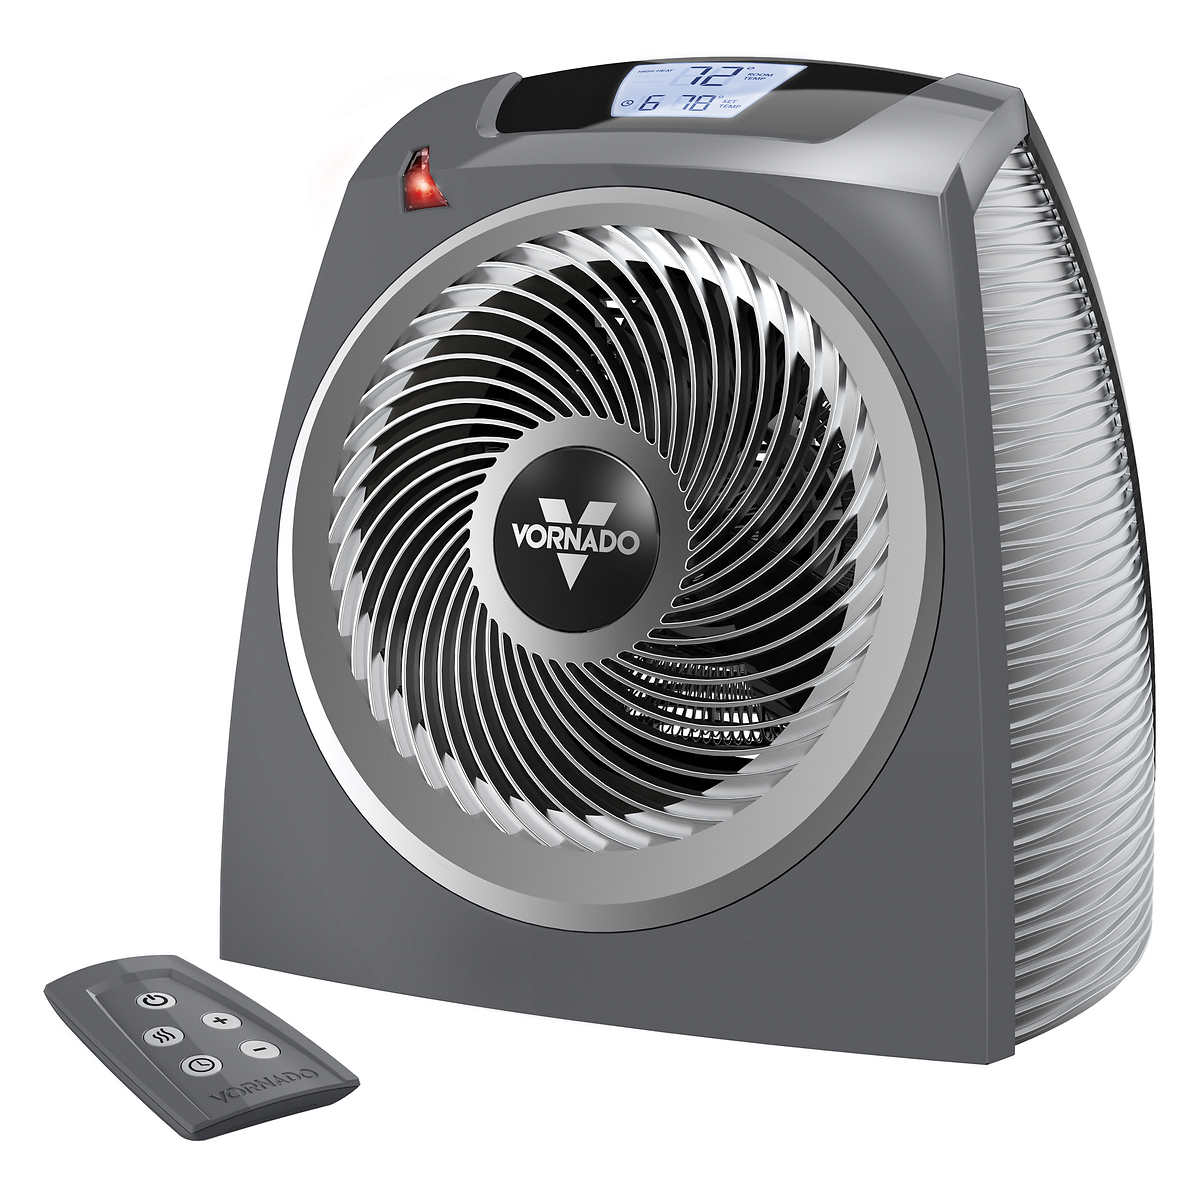 Vornado Whole Room Heater and Fan is $59.99 in-warehouse and $69.99 online (includes shipping).